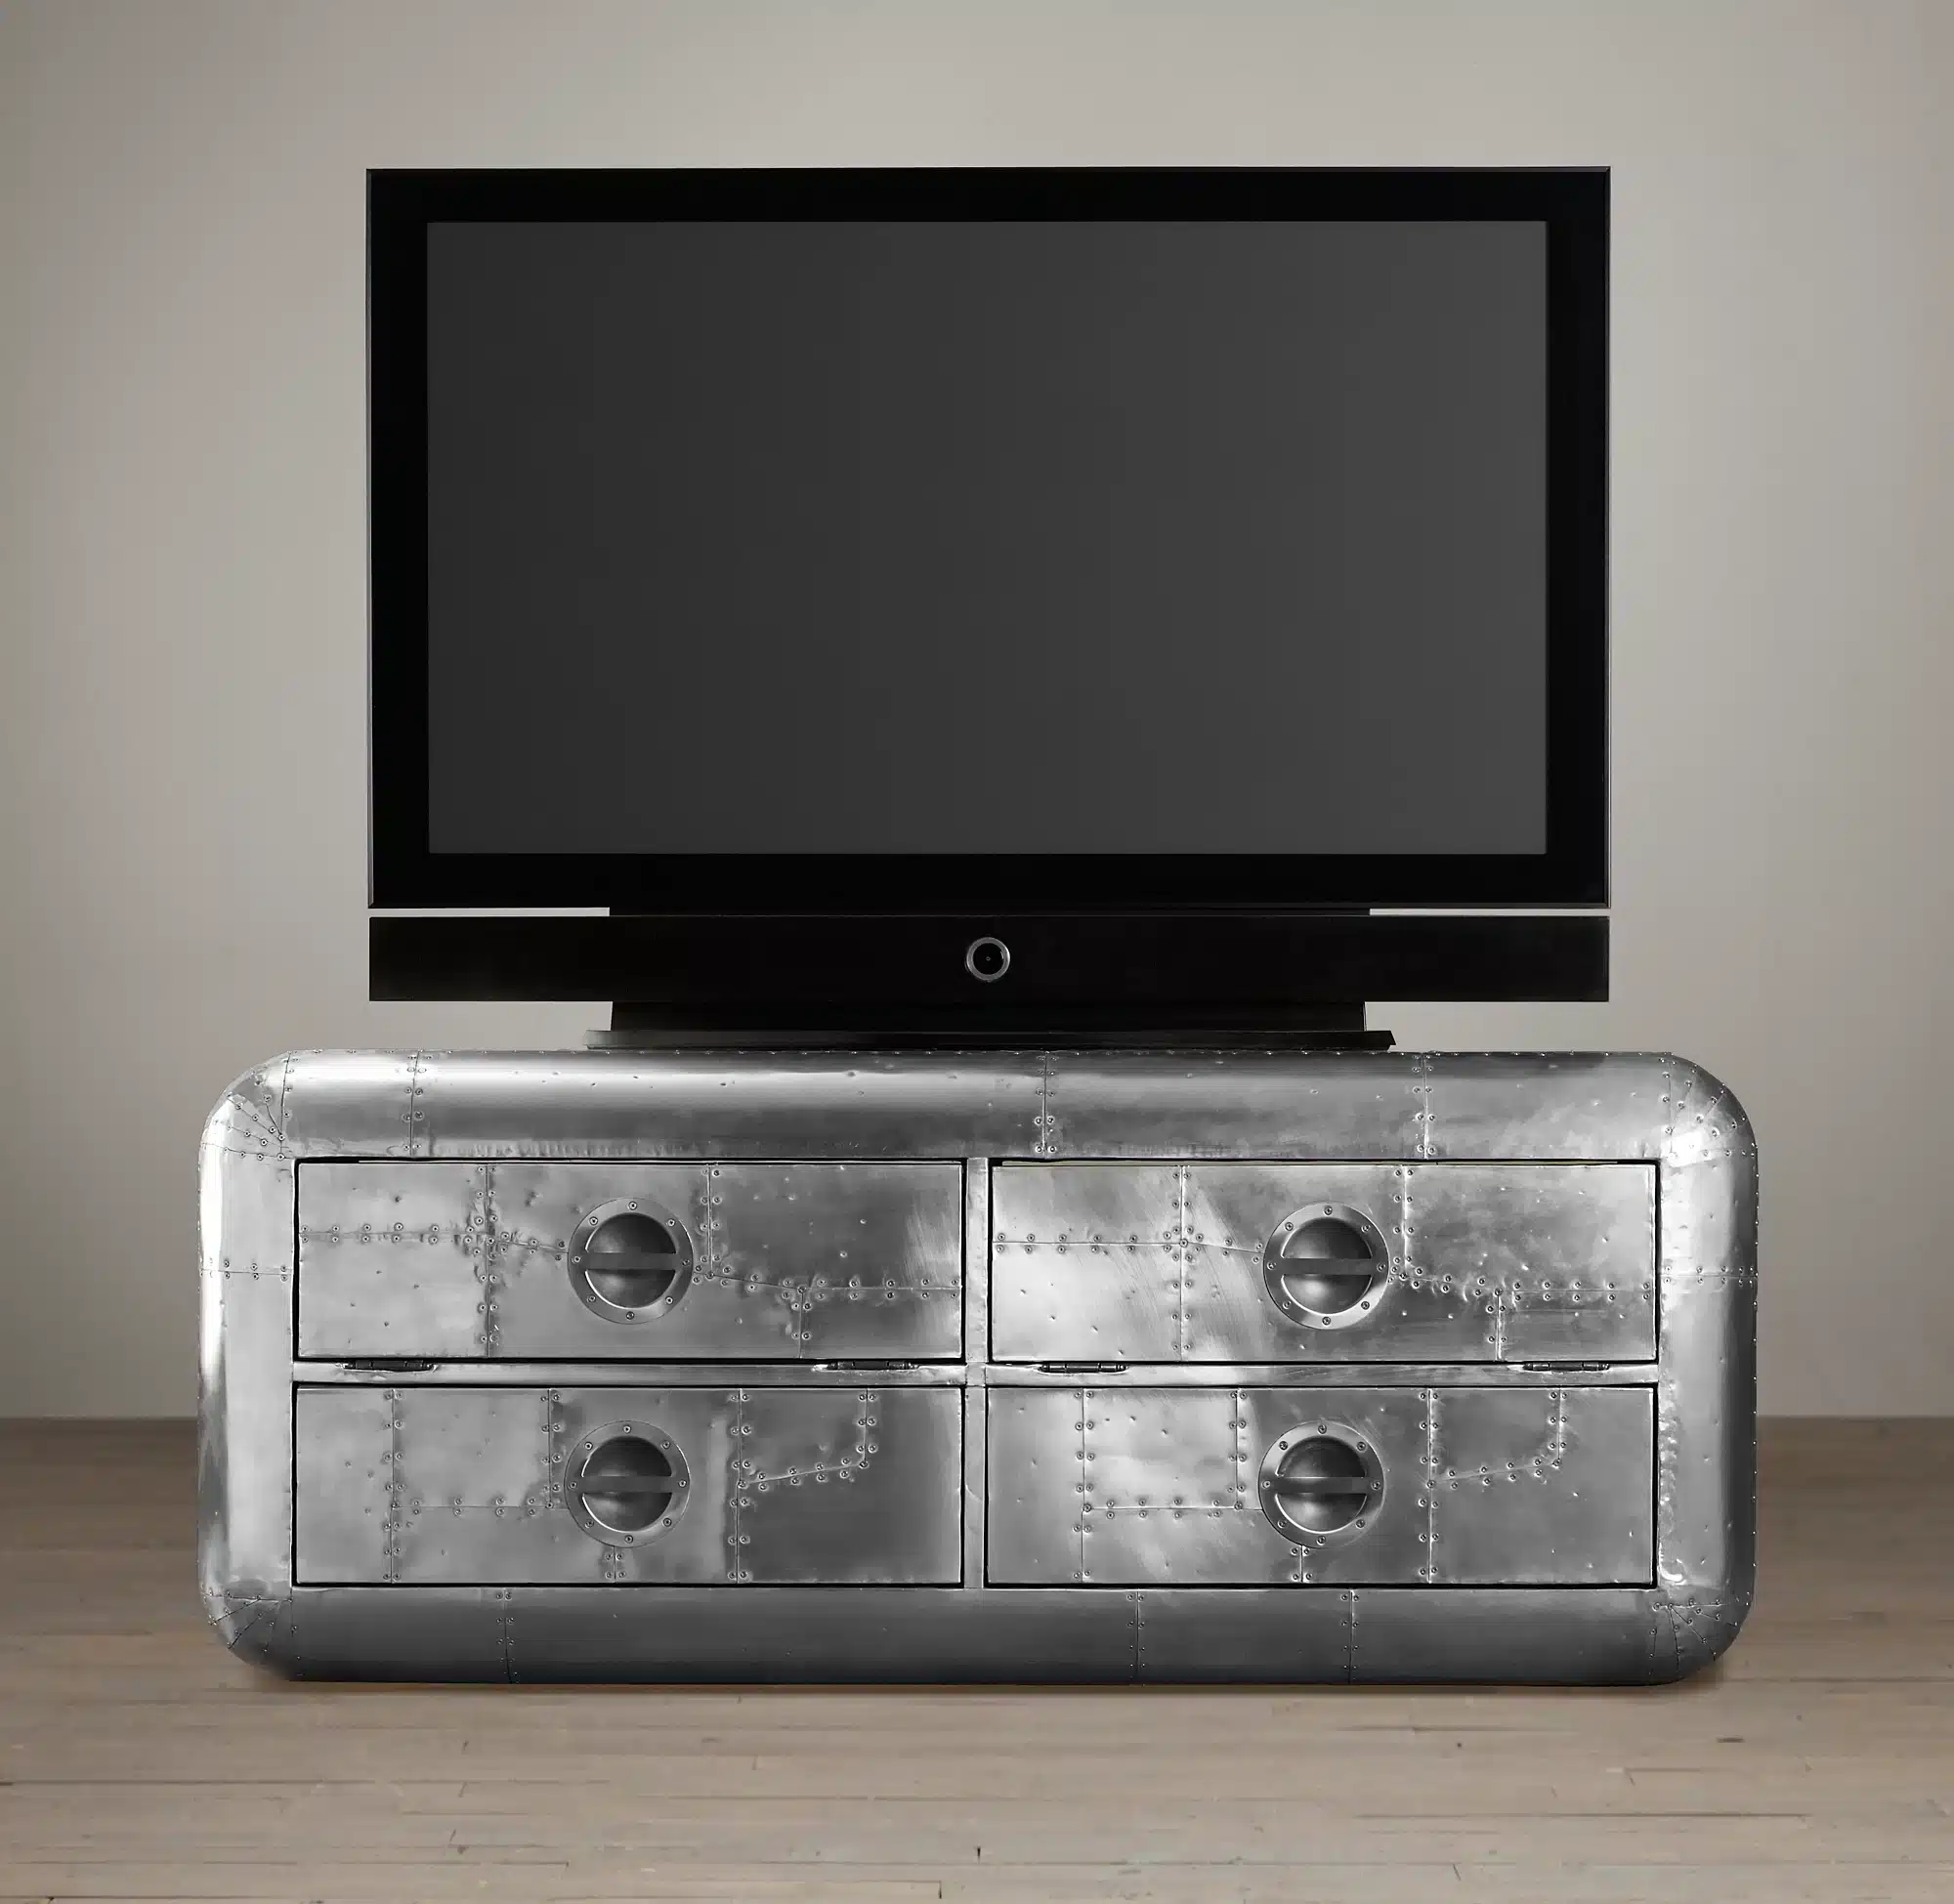 An aluminium Aviator tv cabinet inspired by two different military aircraft, melded together in one cool design.